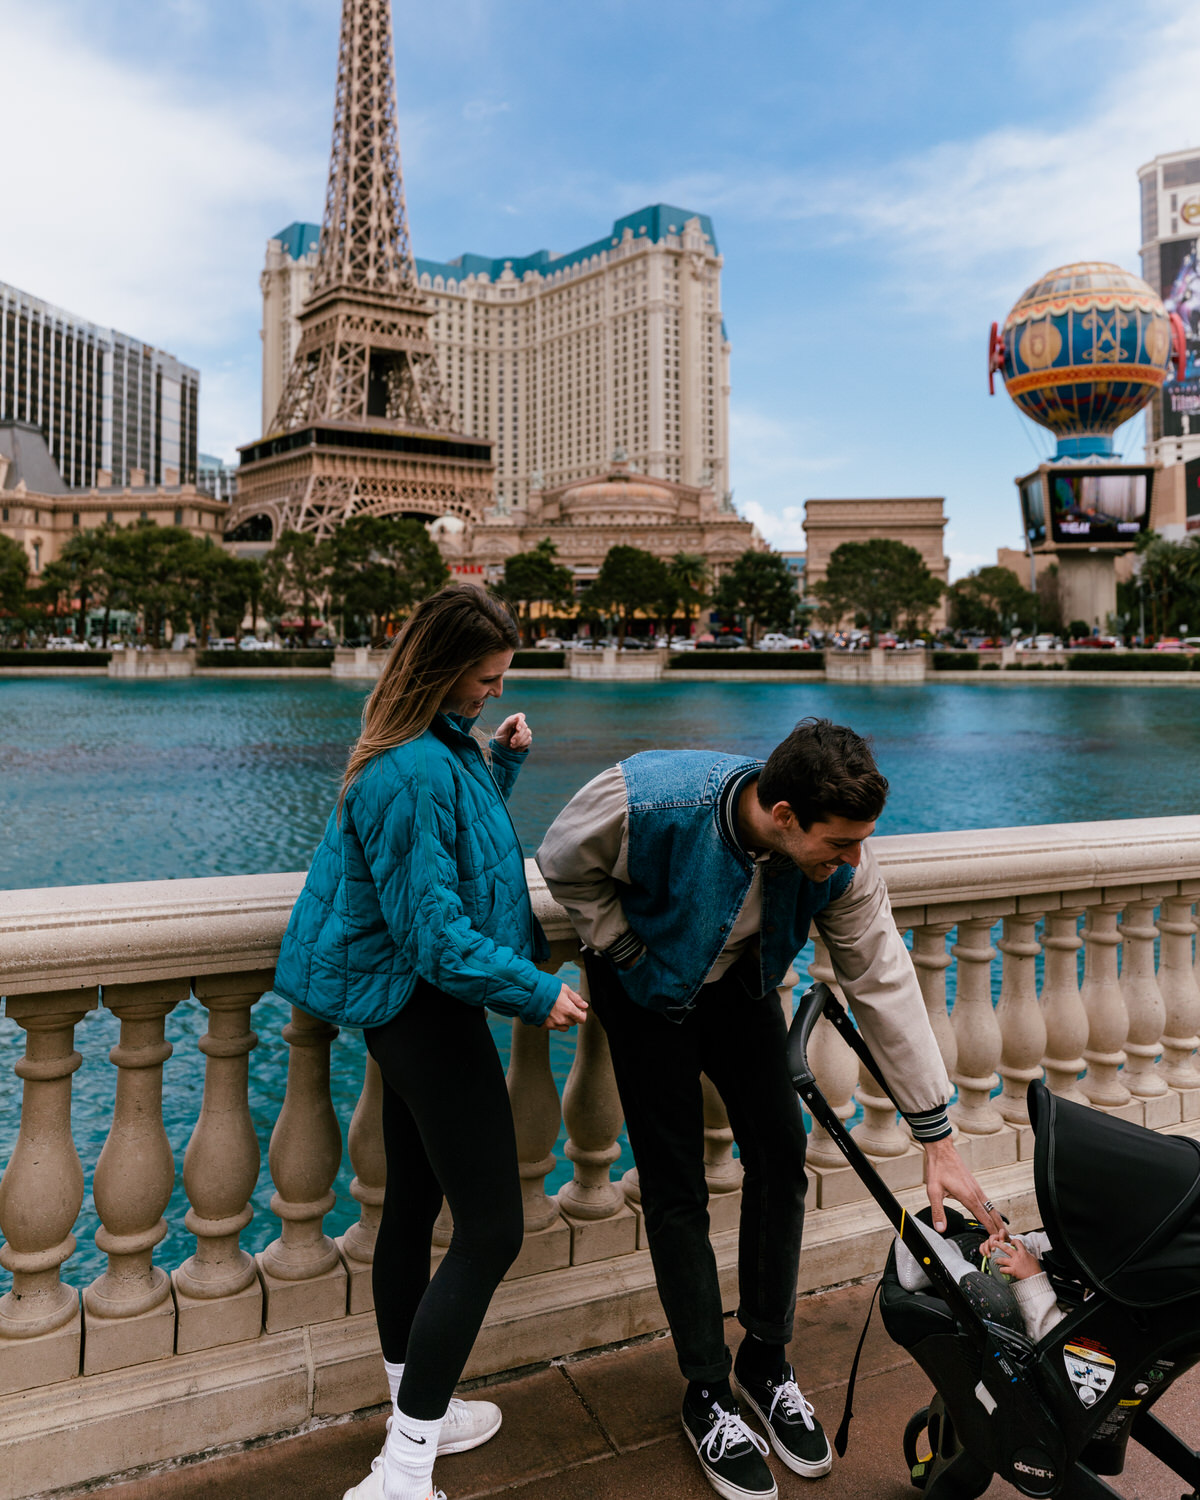 Las Vegas with Kids: 30 Things to Do for a Memorable Family Trip - Relaxation and Leisure for the Whole Family